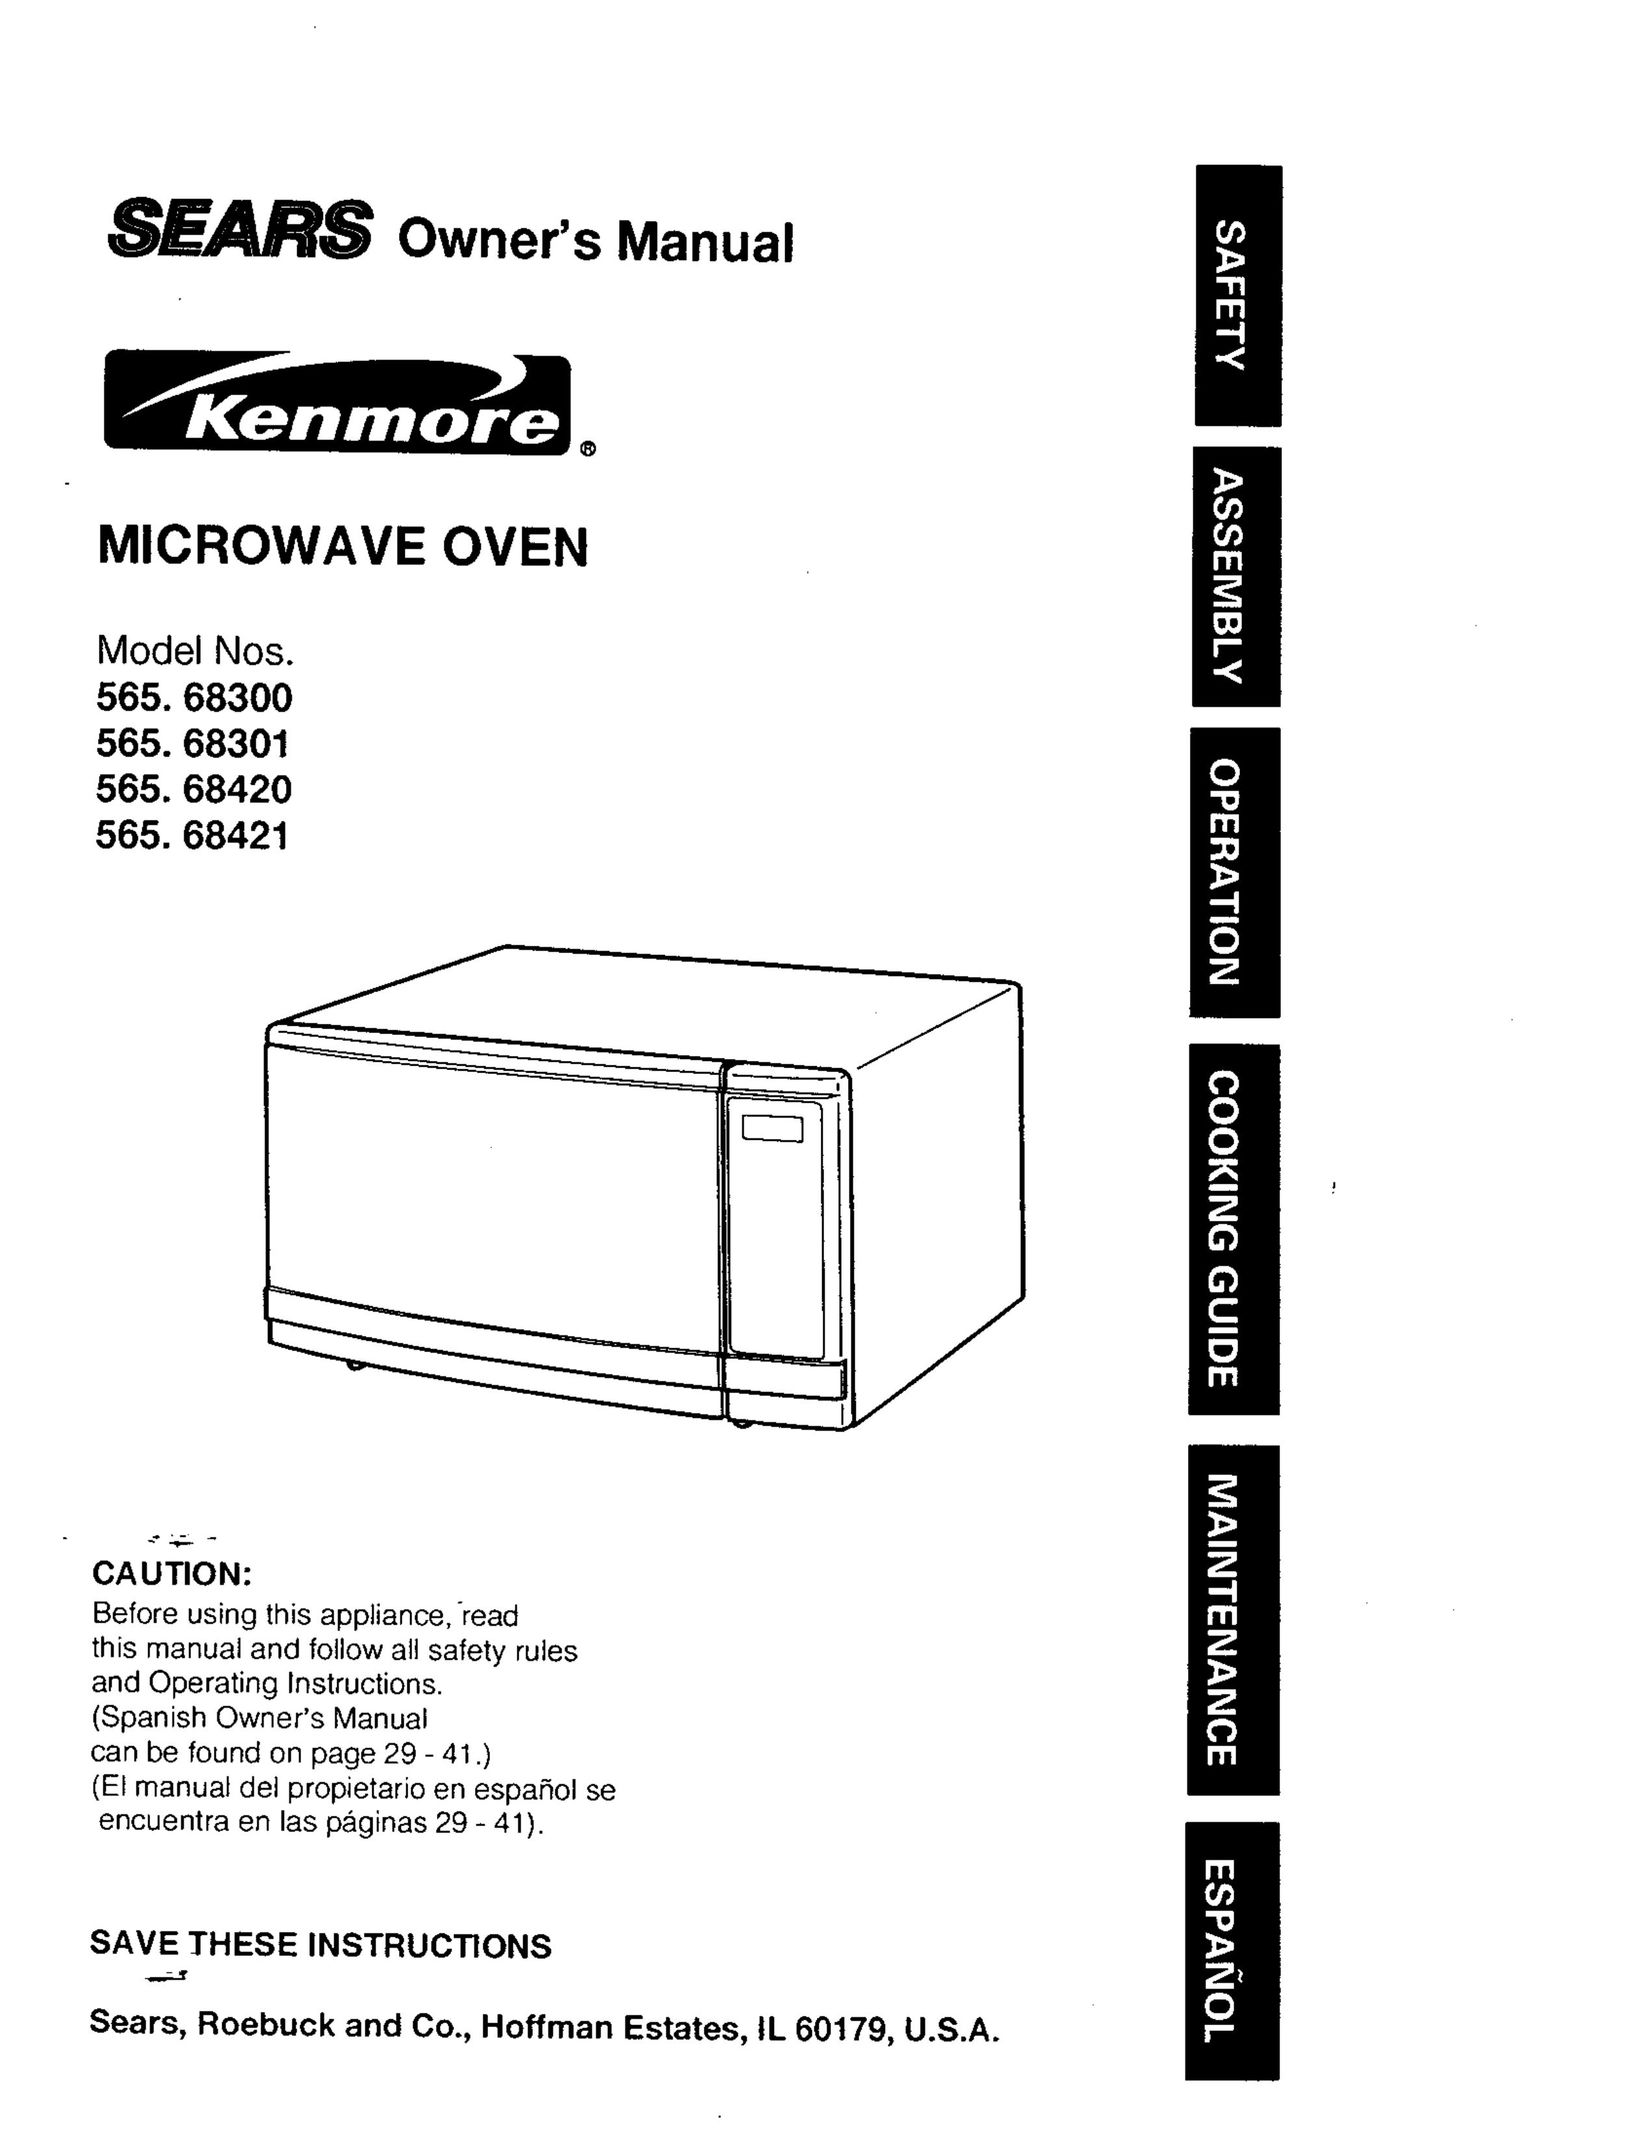 Kenmore 565.68301 Microwave Oven User Manual